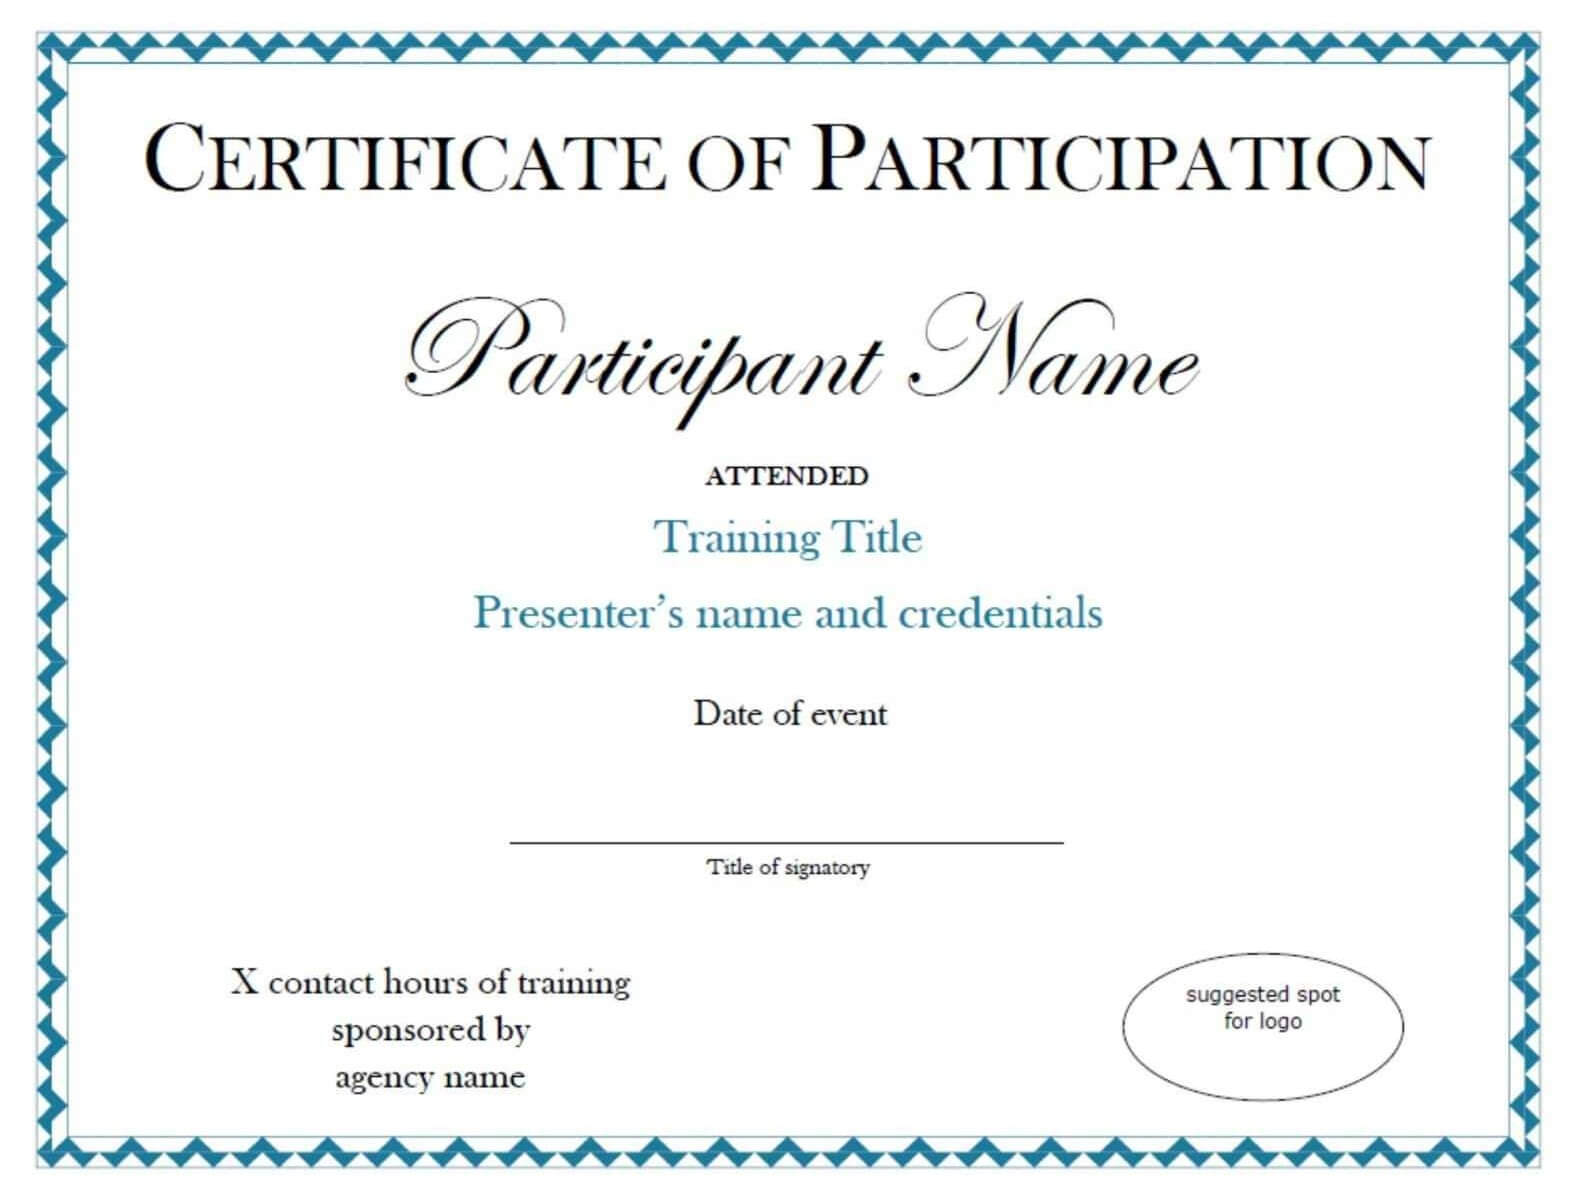 Certificates. Best Certificate Of Participation Template With Certificate Of Participation Template Ppt